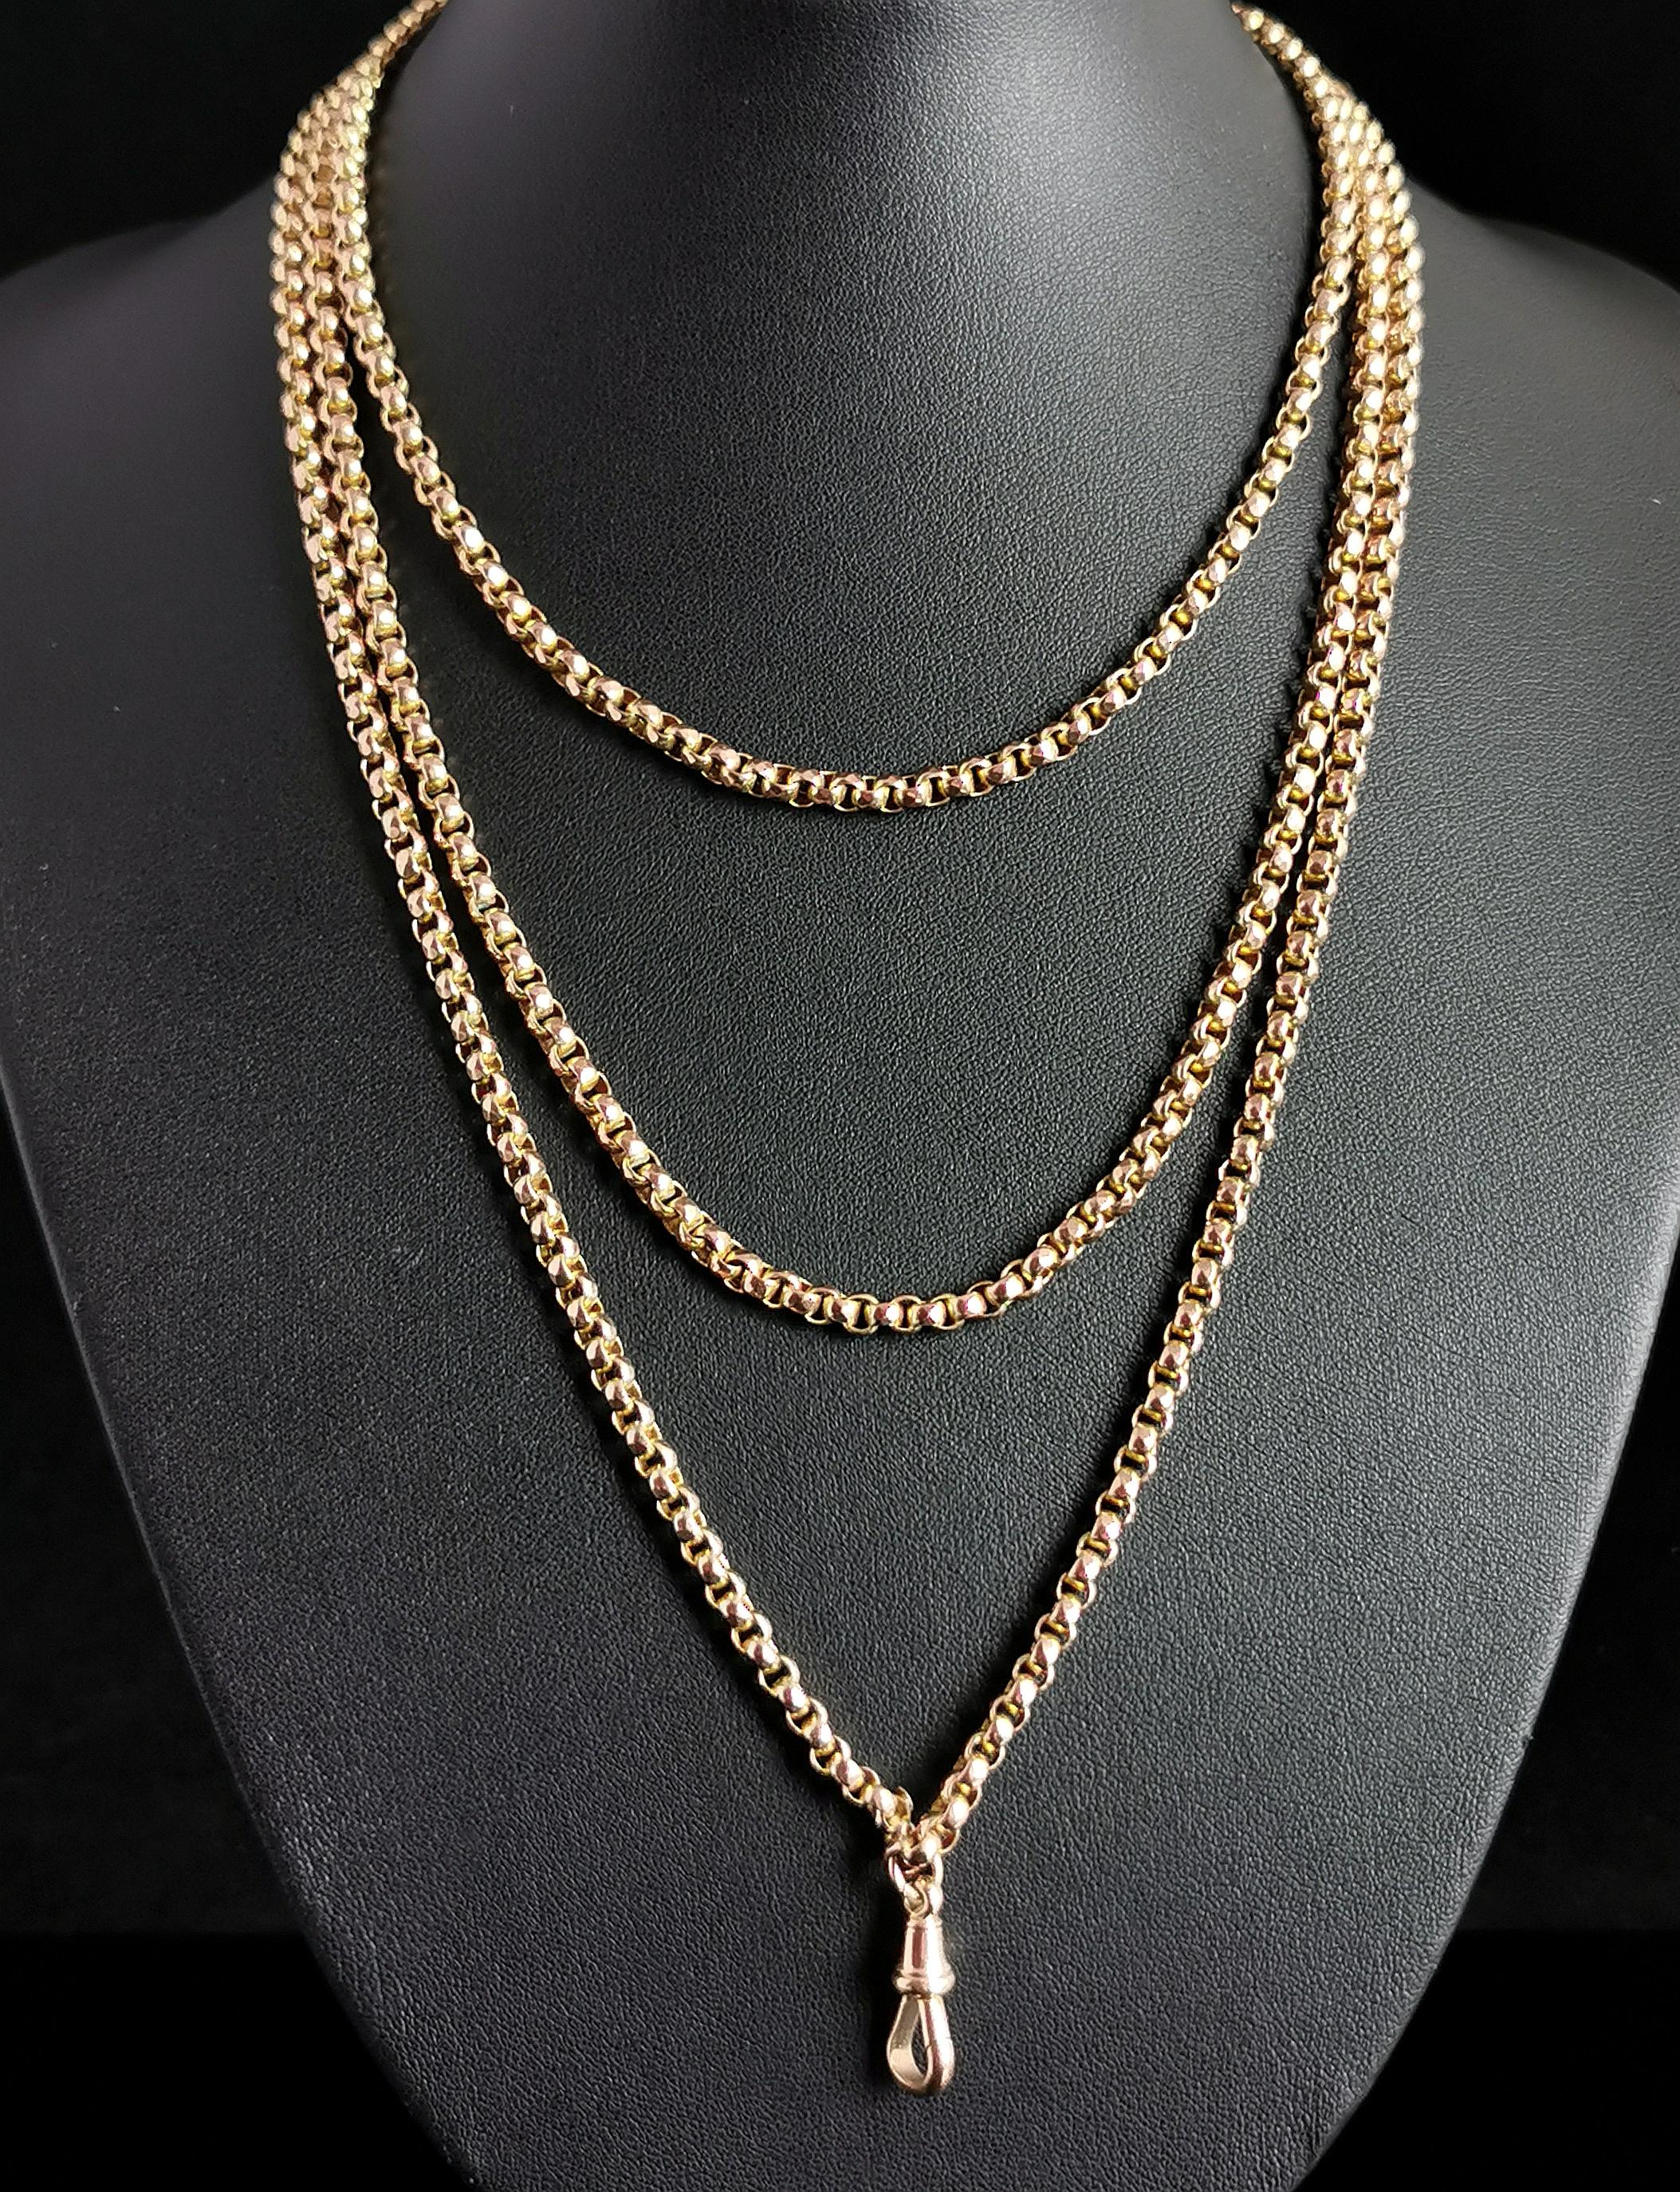 Antique 9k Yellow Gold Longuard Chain Necklace, Muff Chain, Victorian 11